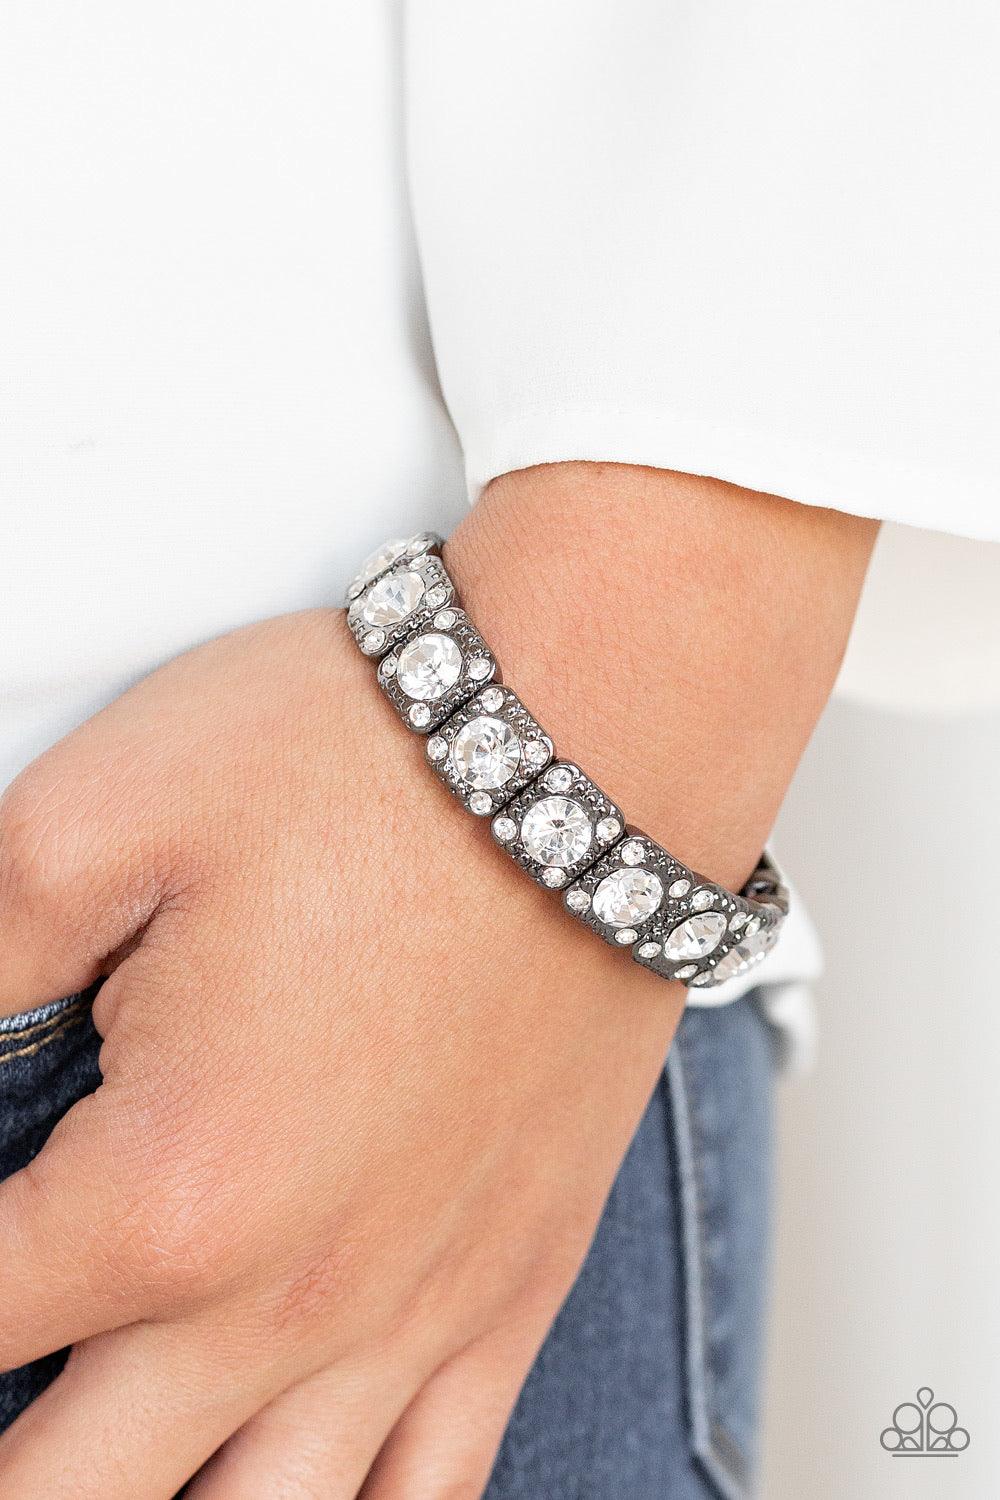 Paparazzi Accessories Blinged Out - Black Featuring oversized white rhinestone centers, studded gunmetal frames radiating in glassy white rhinestones are threaded along a stretchy band around the wrist for a glamorous fashion. Jewelry